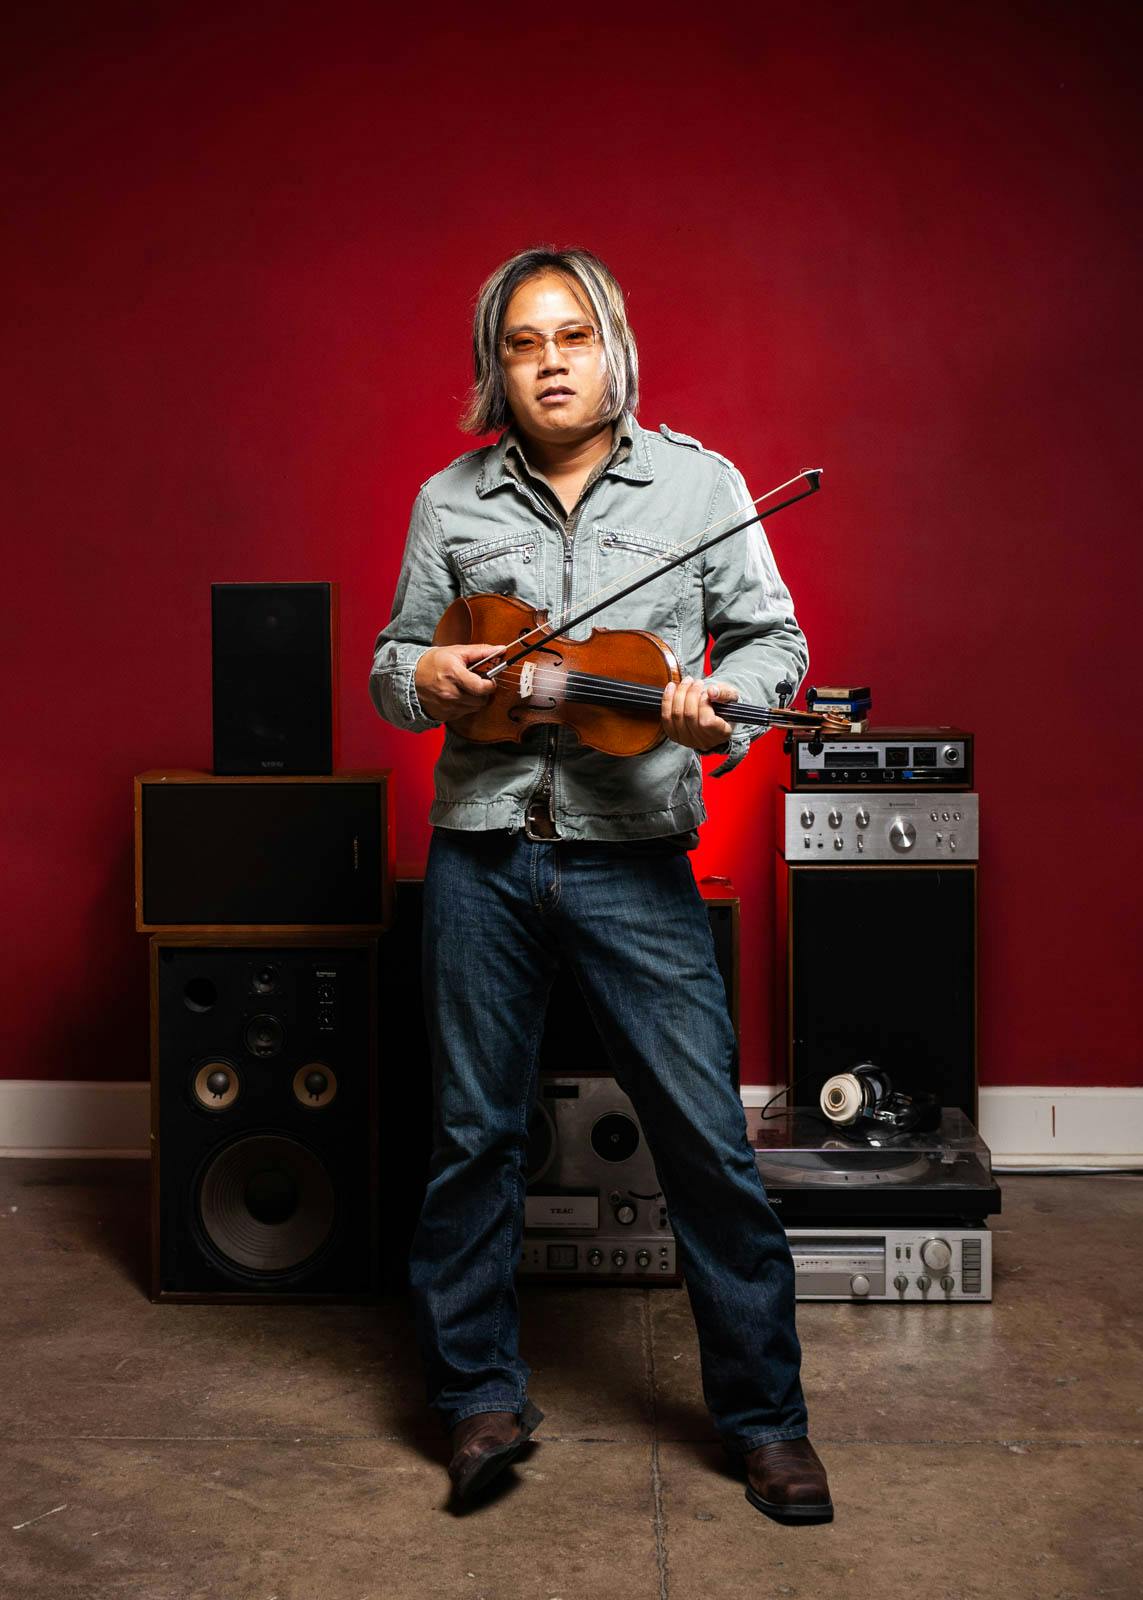 Rock and roll violinist against a red wall with amps and speakers behind him.